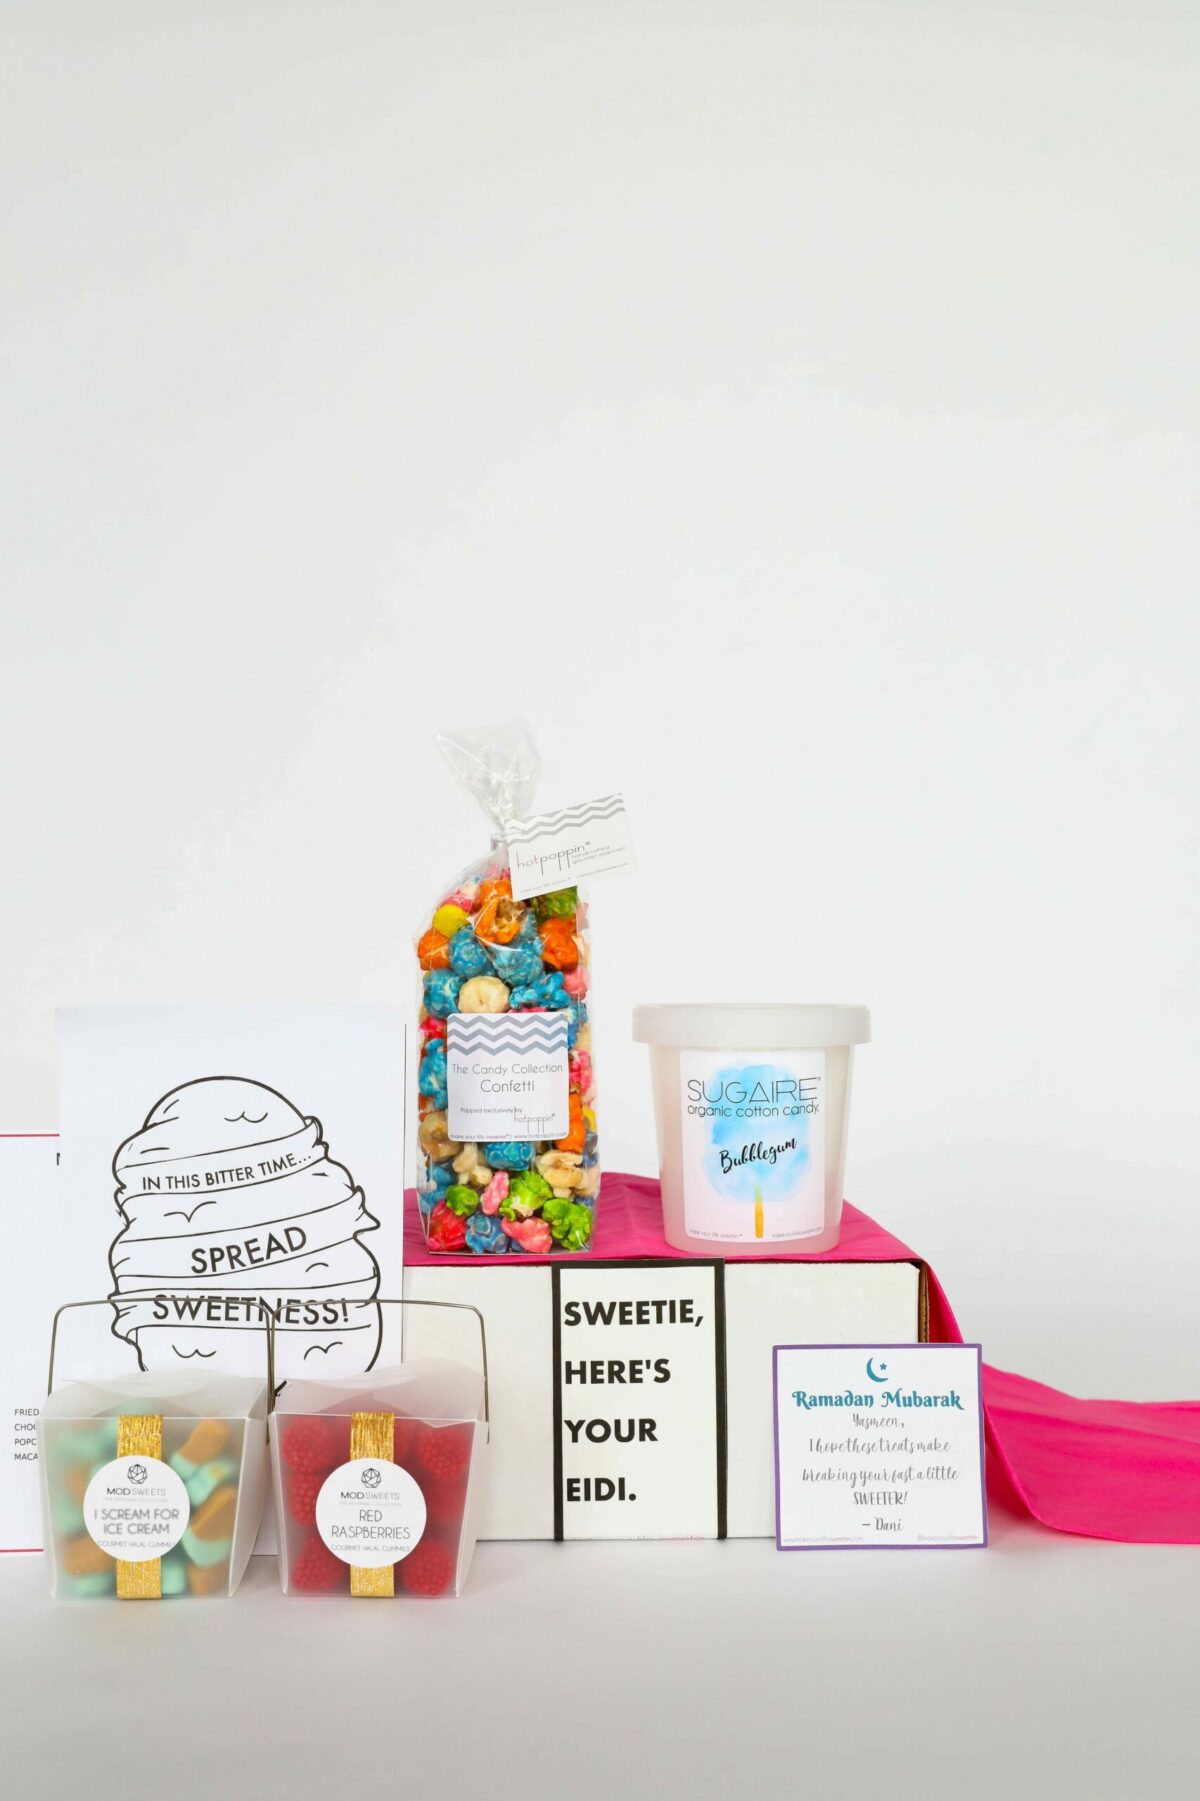 Cotton, candy popcorn, and candy from Make Your Life Sweeter.